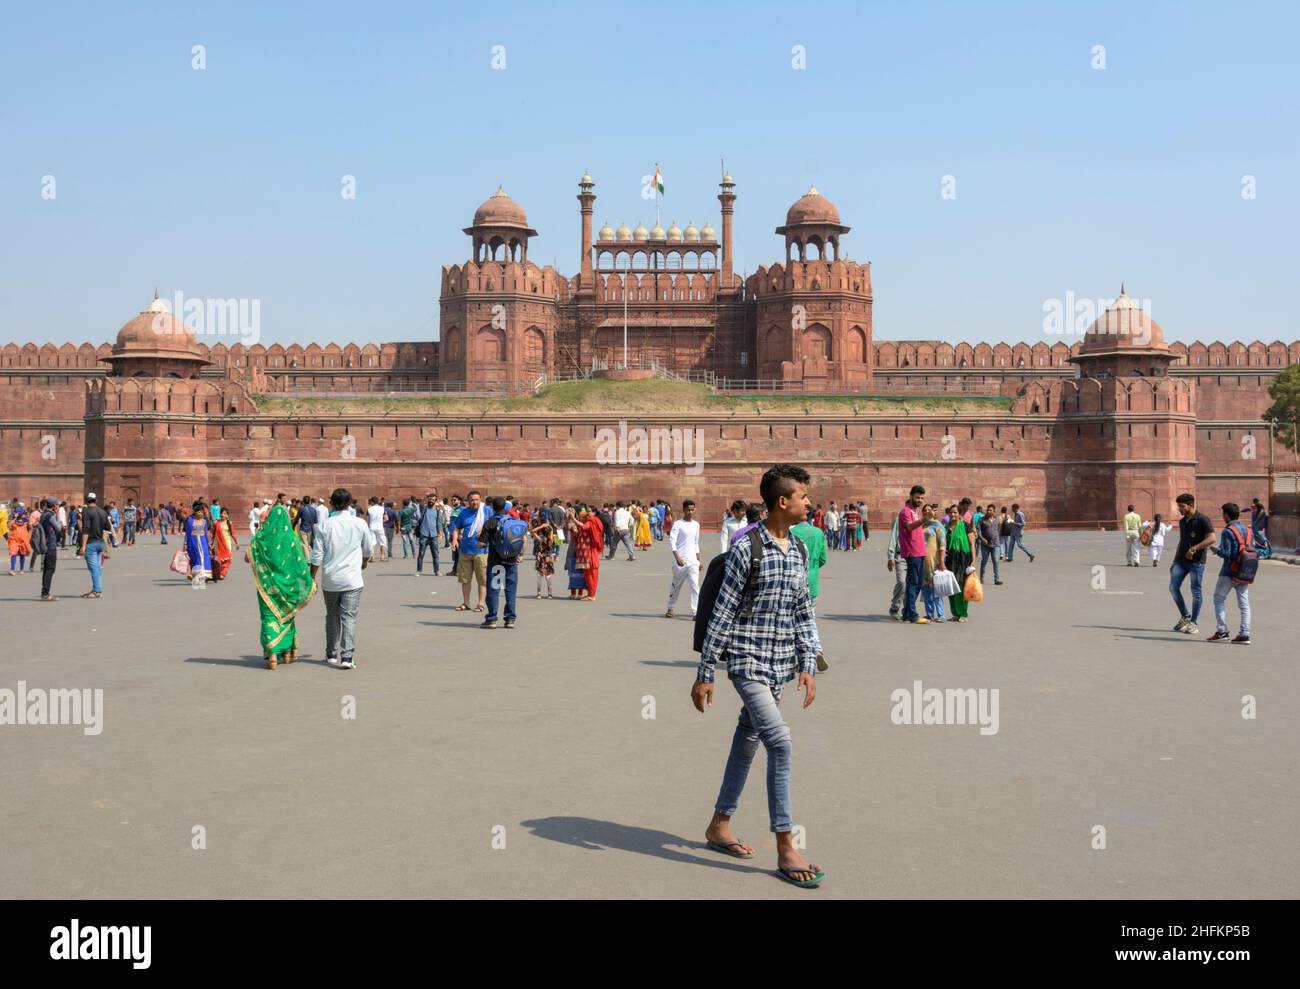 The Red Fort (Lal Qila), Old Delhi, India, South Asia Stock Photo